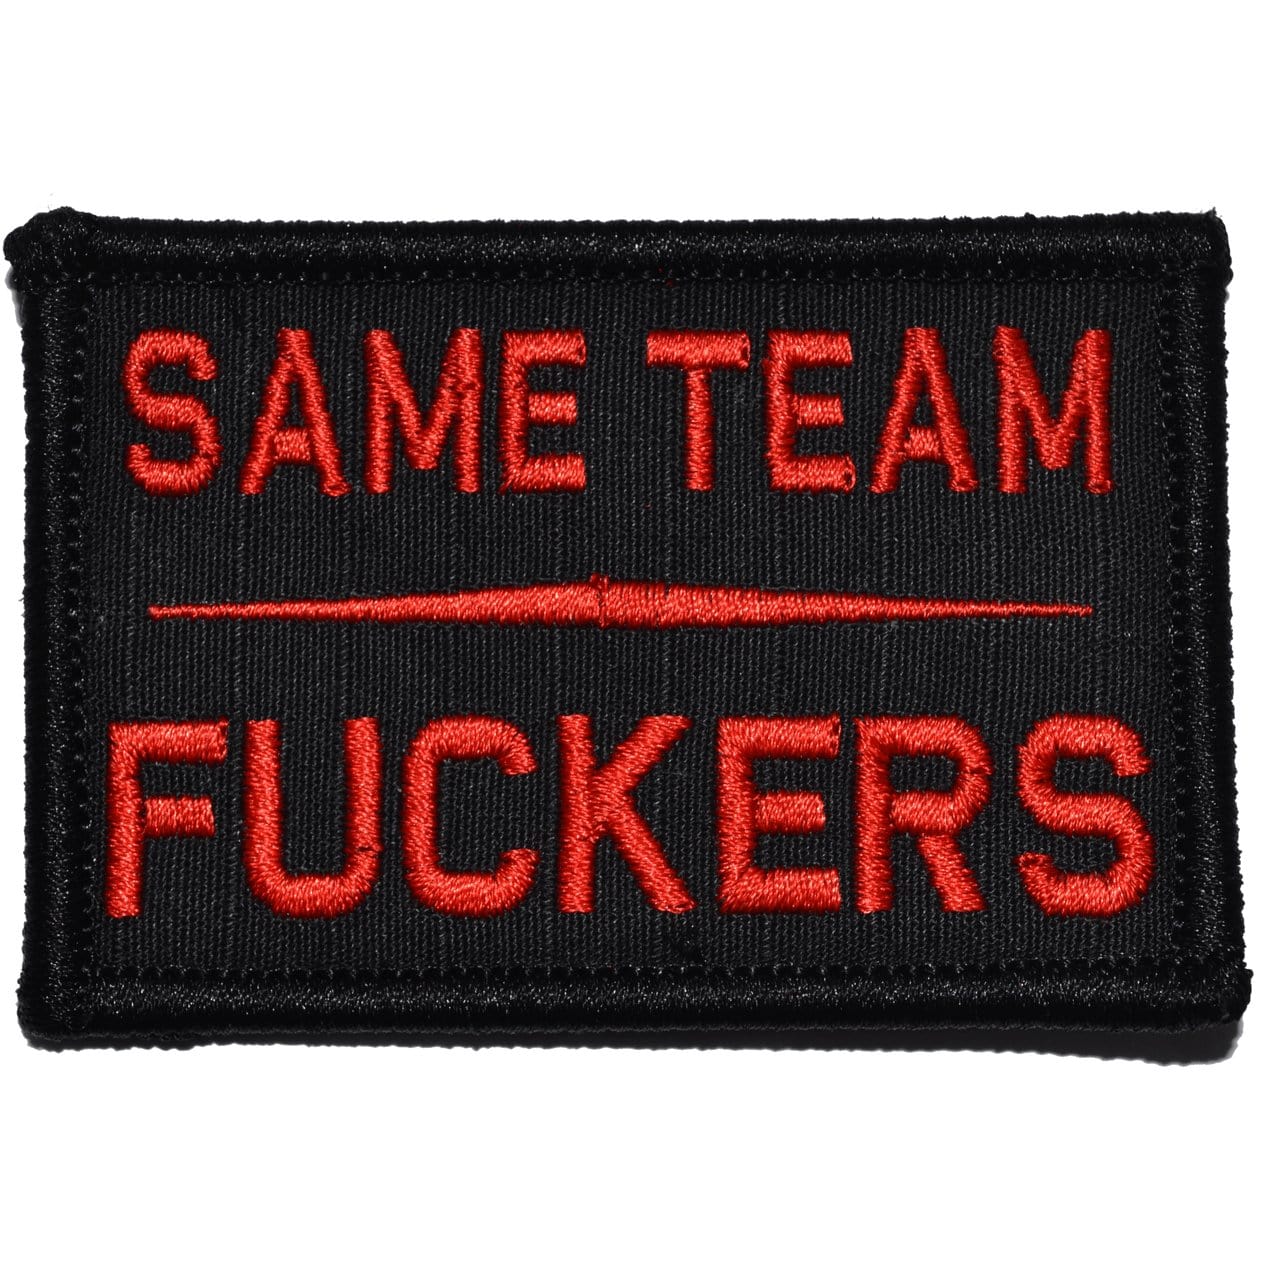 Tactical Gear Junkie Patches Black w/ Red Same Team Fuckers - 2x3 Patch